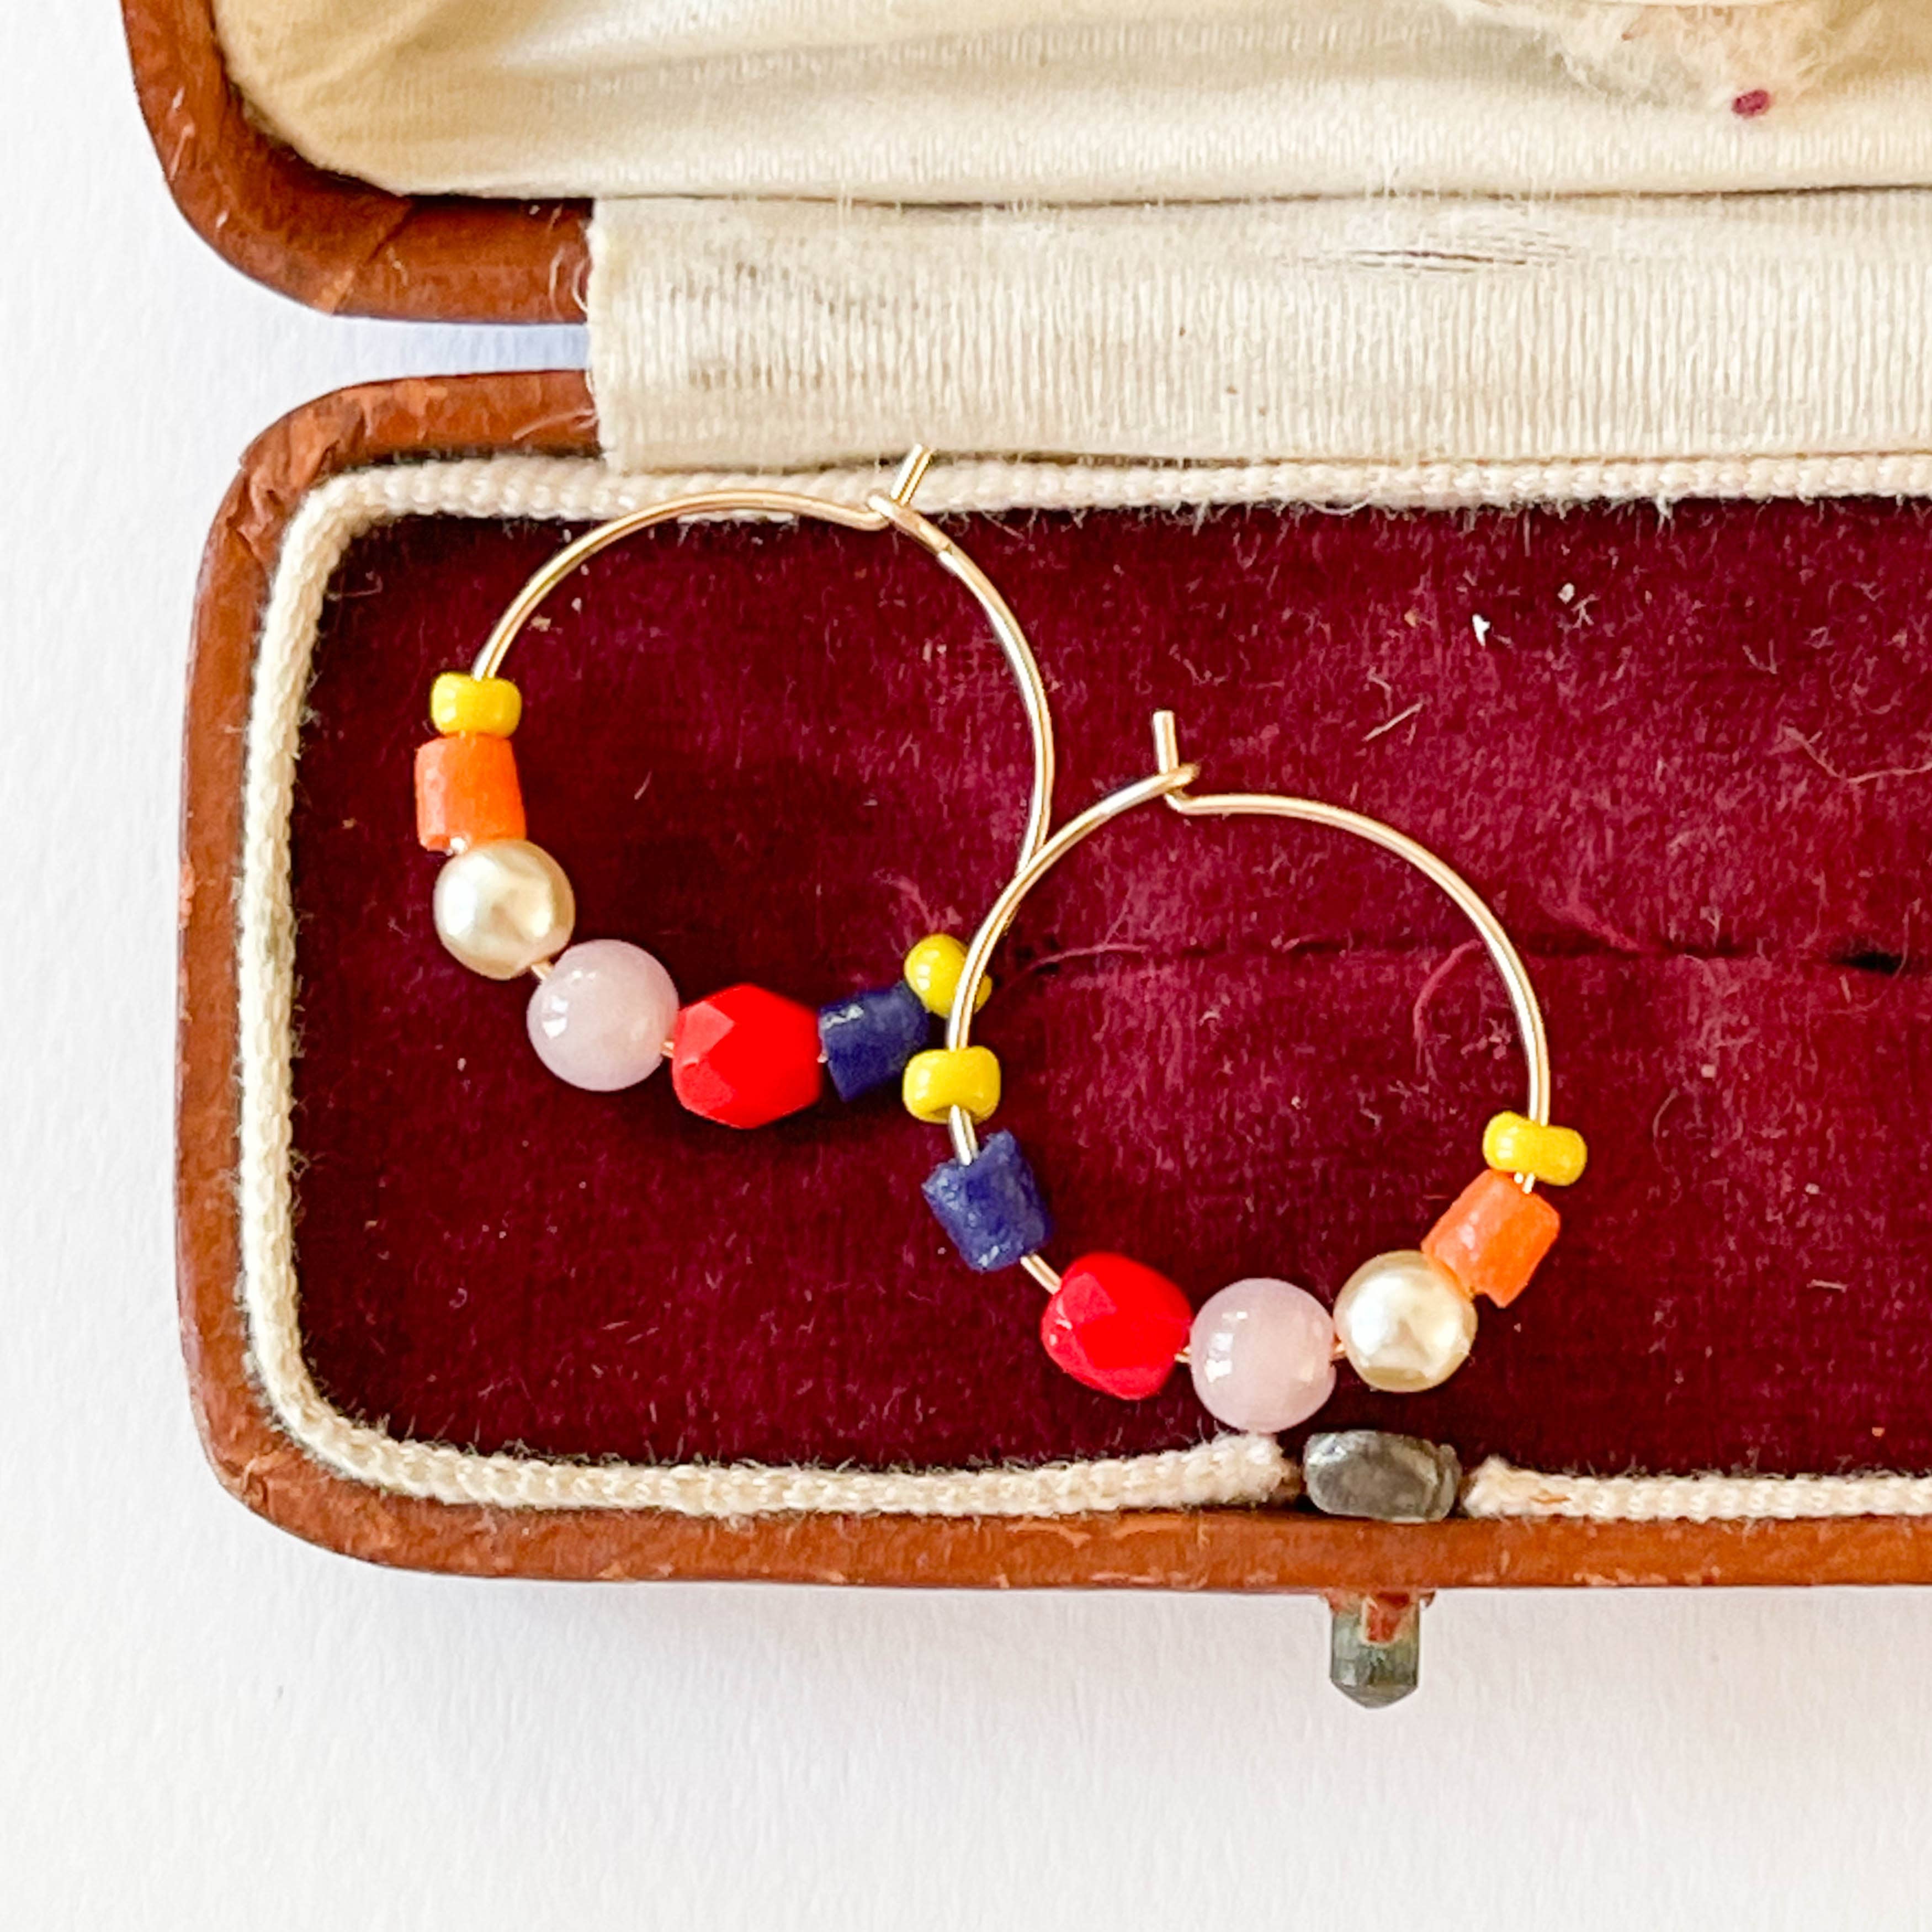 Nest Pretty Things - Small colorful Gold filled hoops